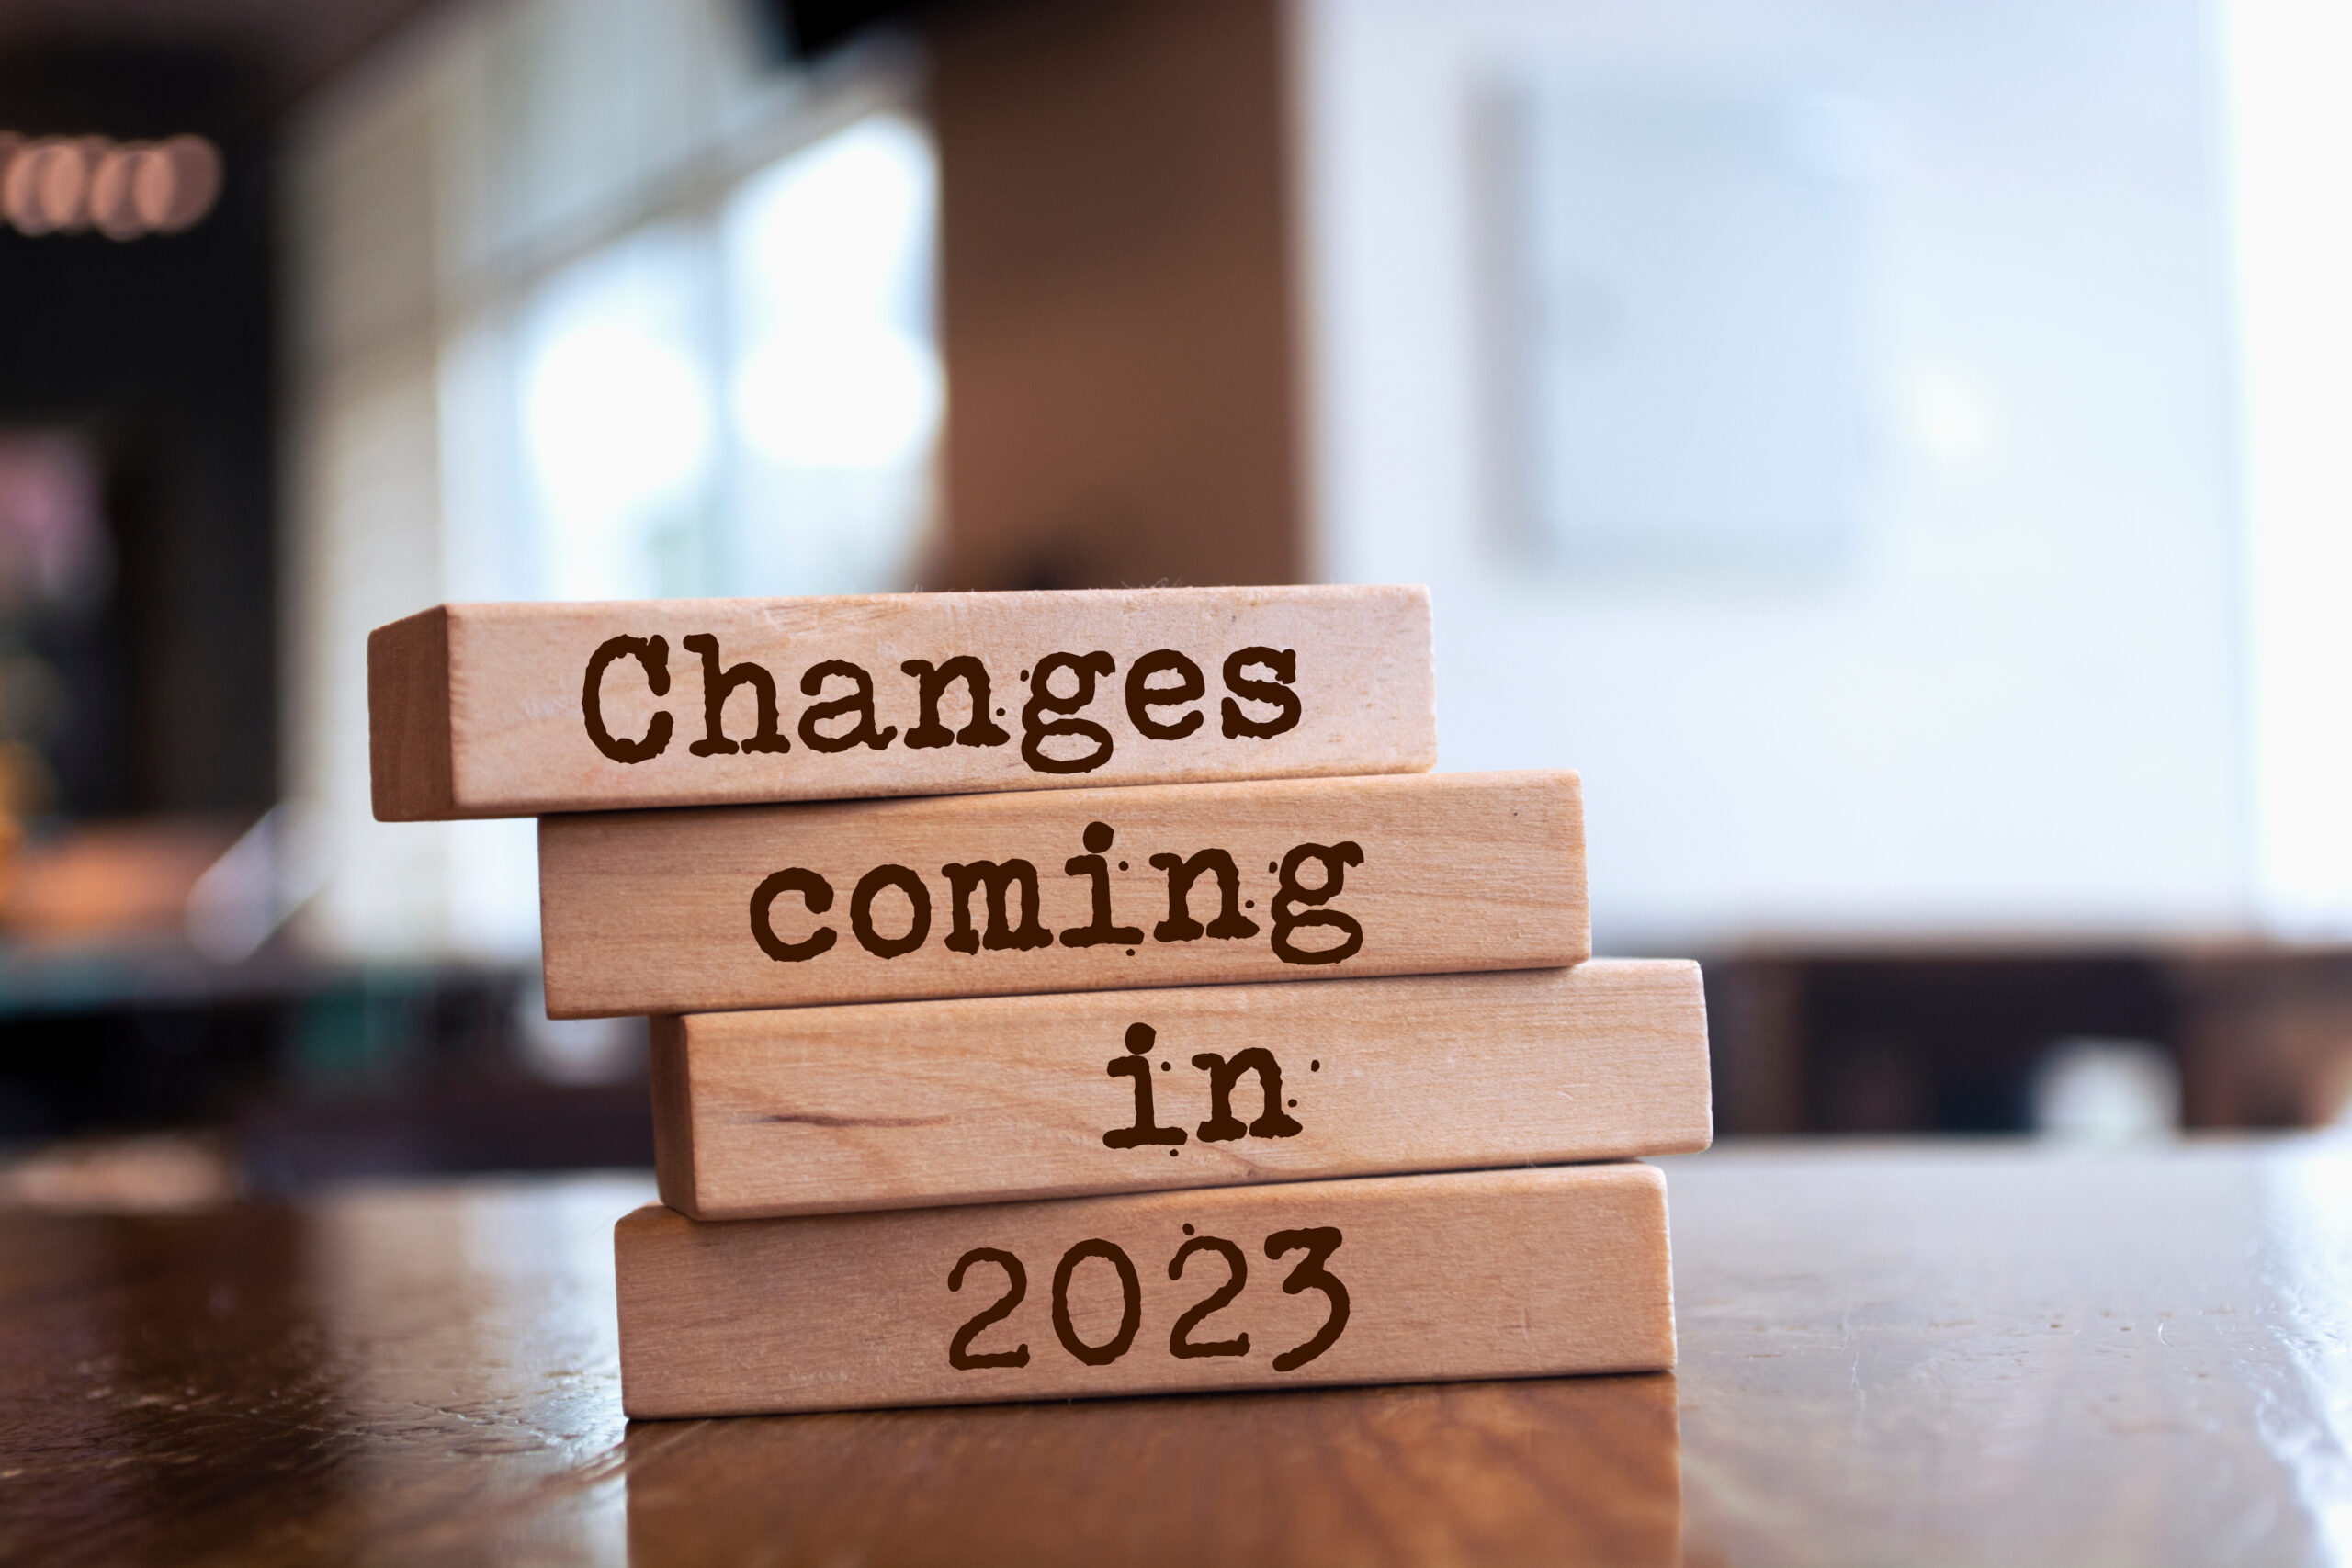 blocks on a table that say "changes coming in 2023"